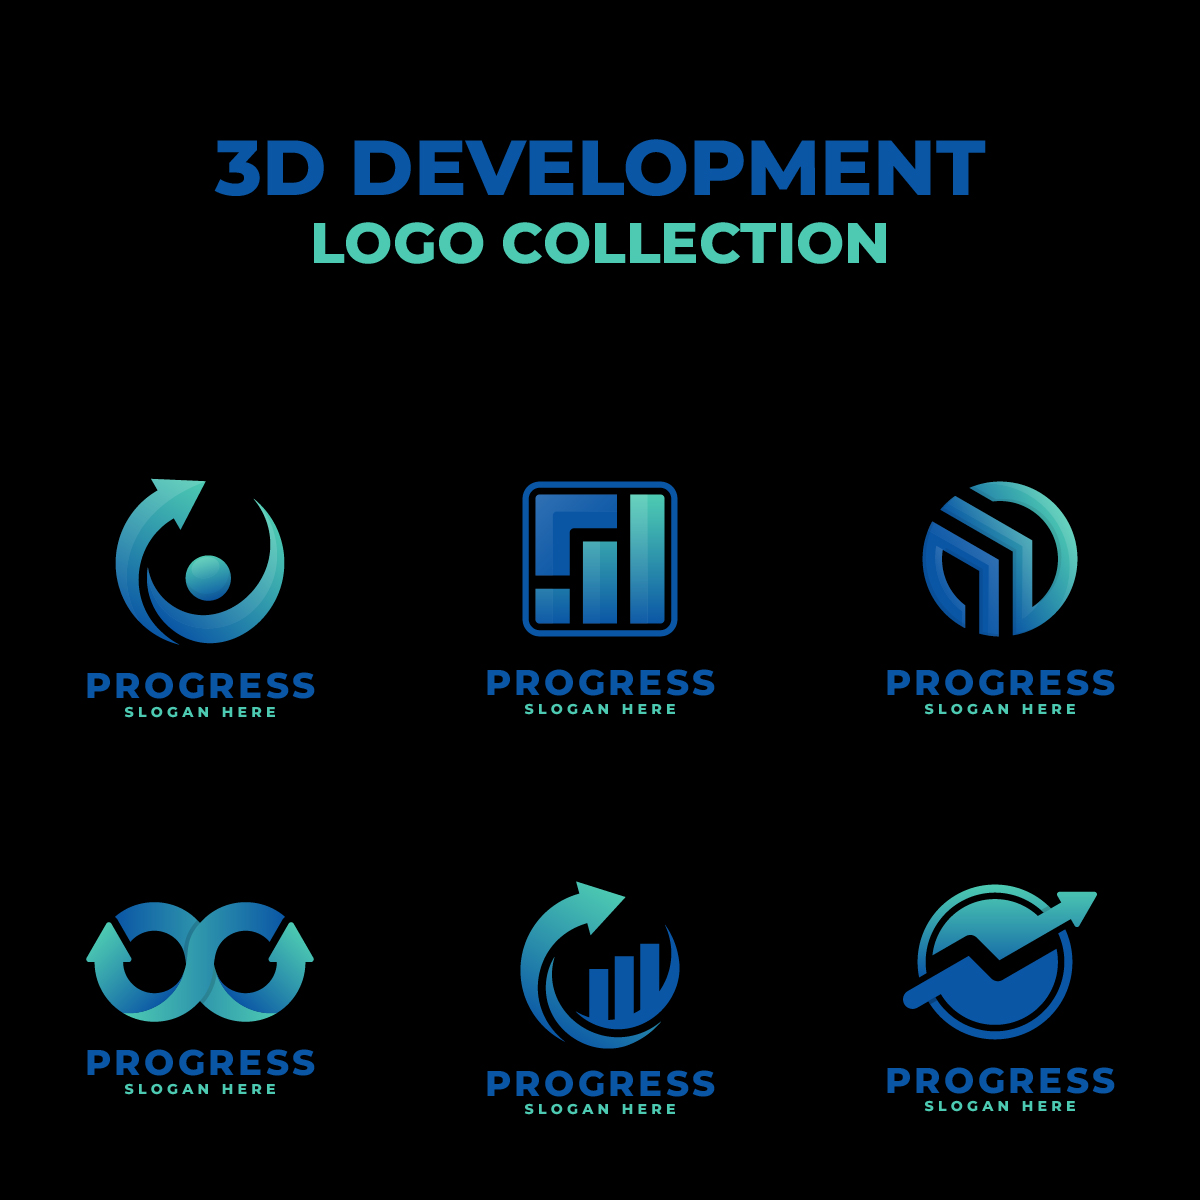 3D Modern Development Logo Collection preview image.